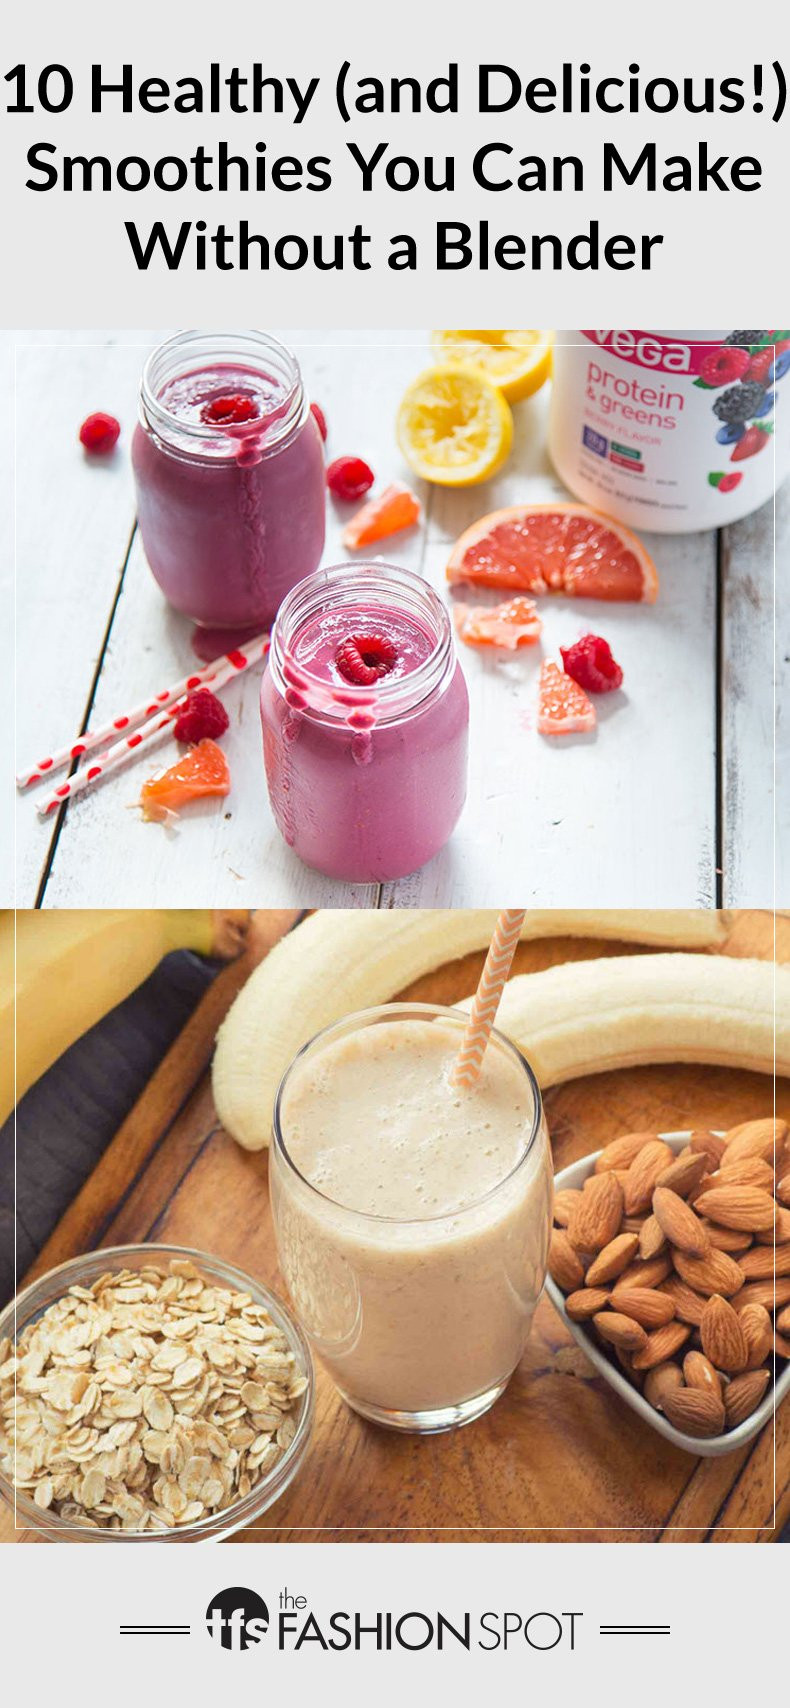 Blender Smoothie Recipes
 10 Healthy Smoothie Recipes No Blender Required